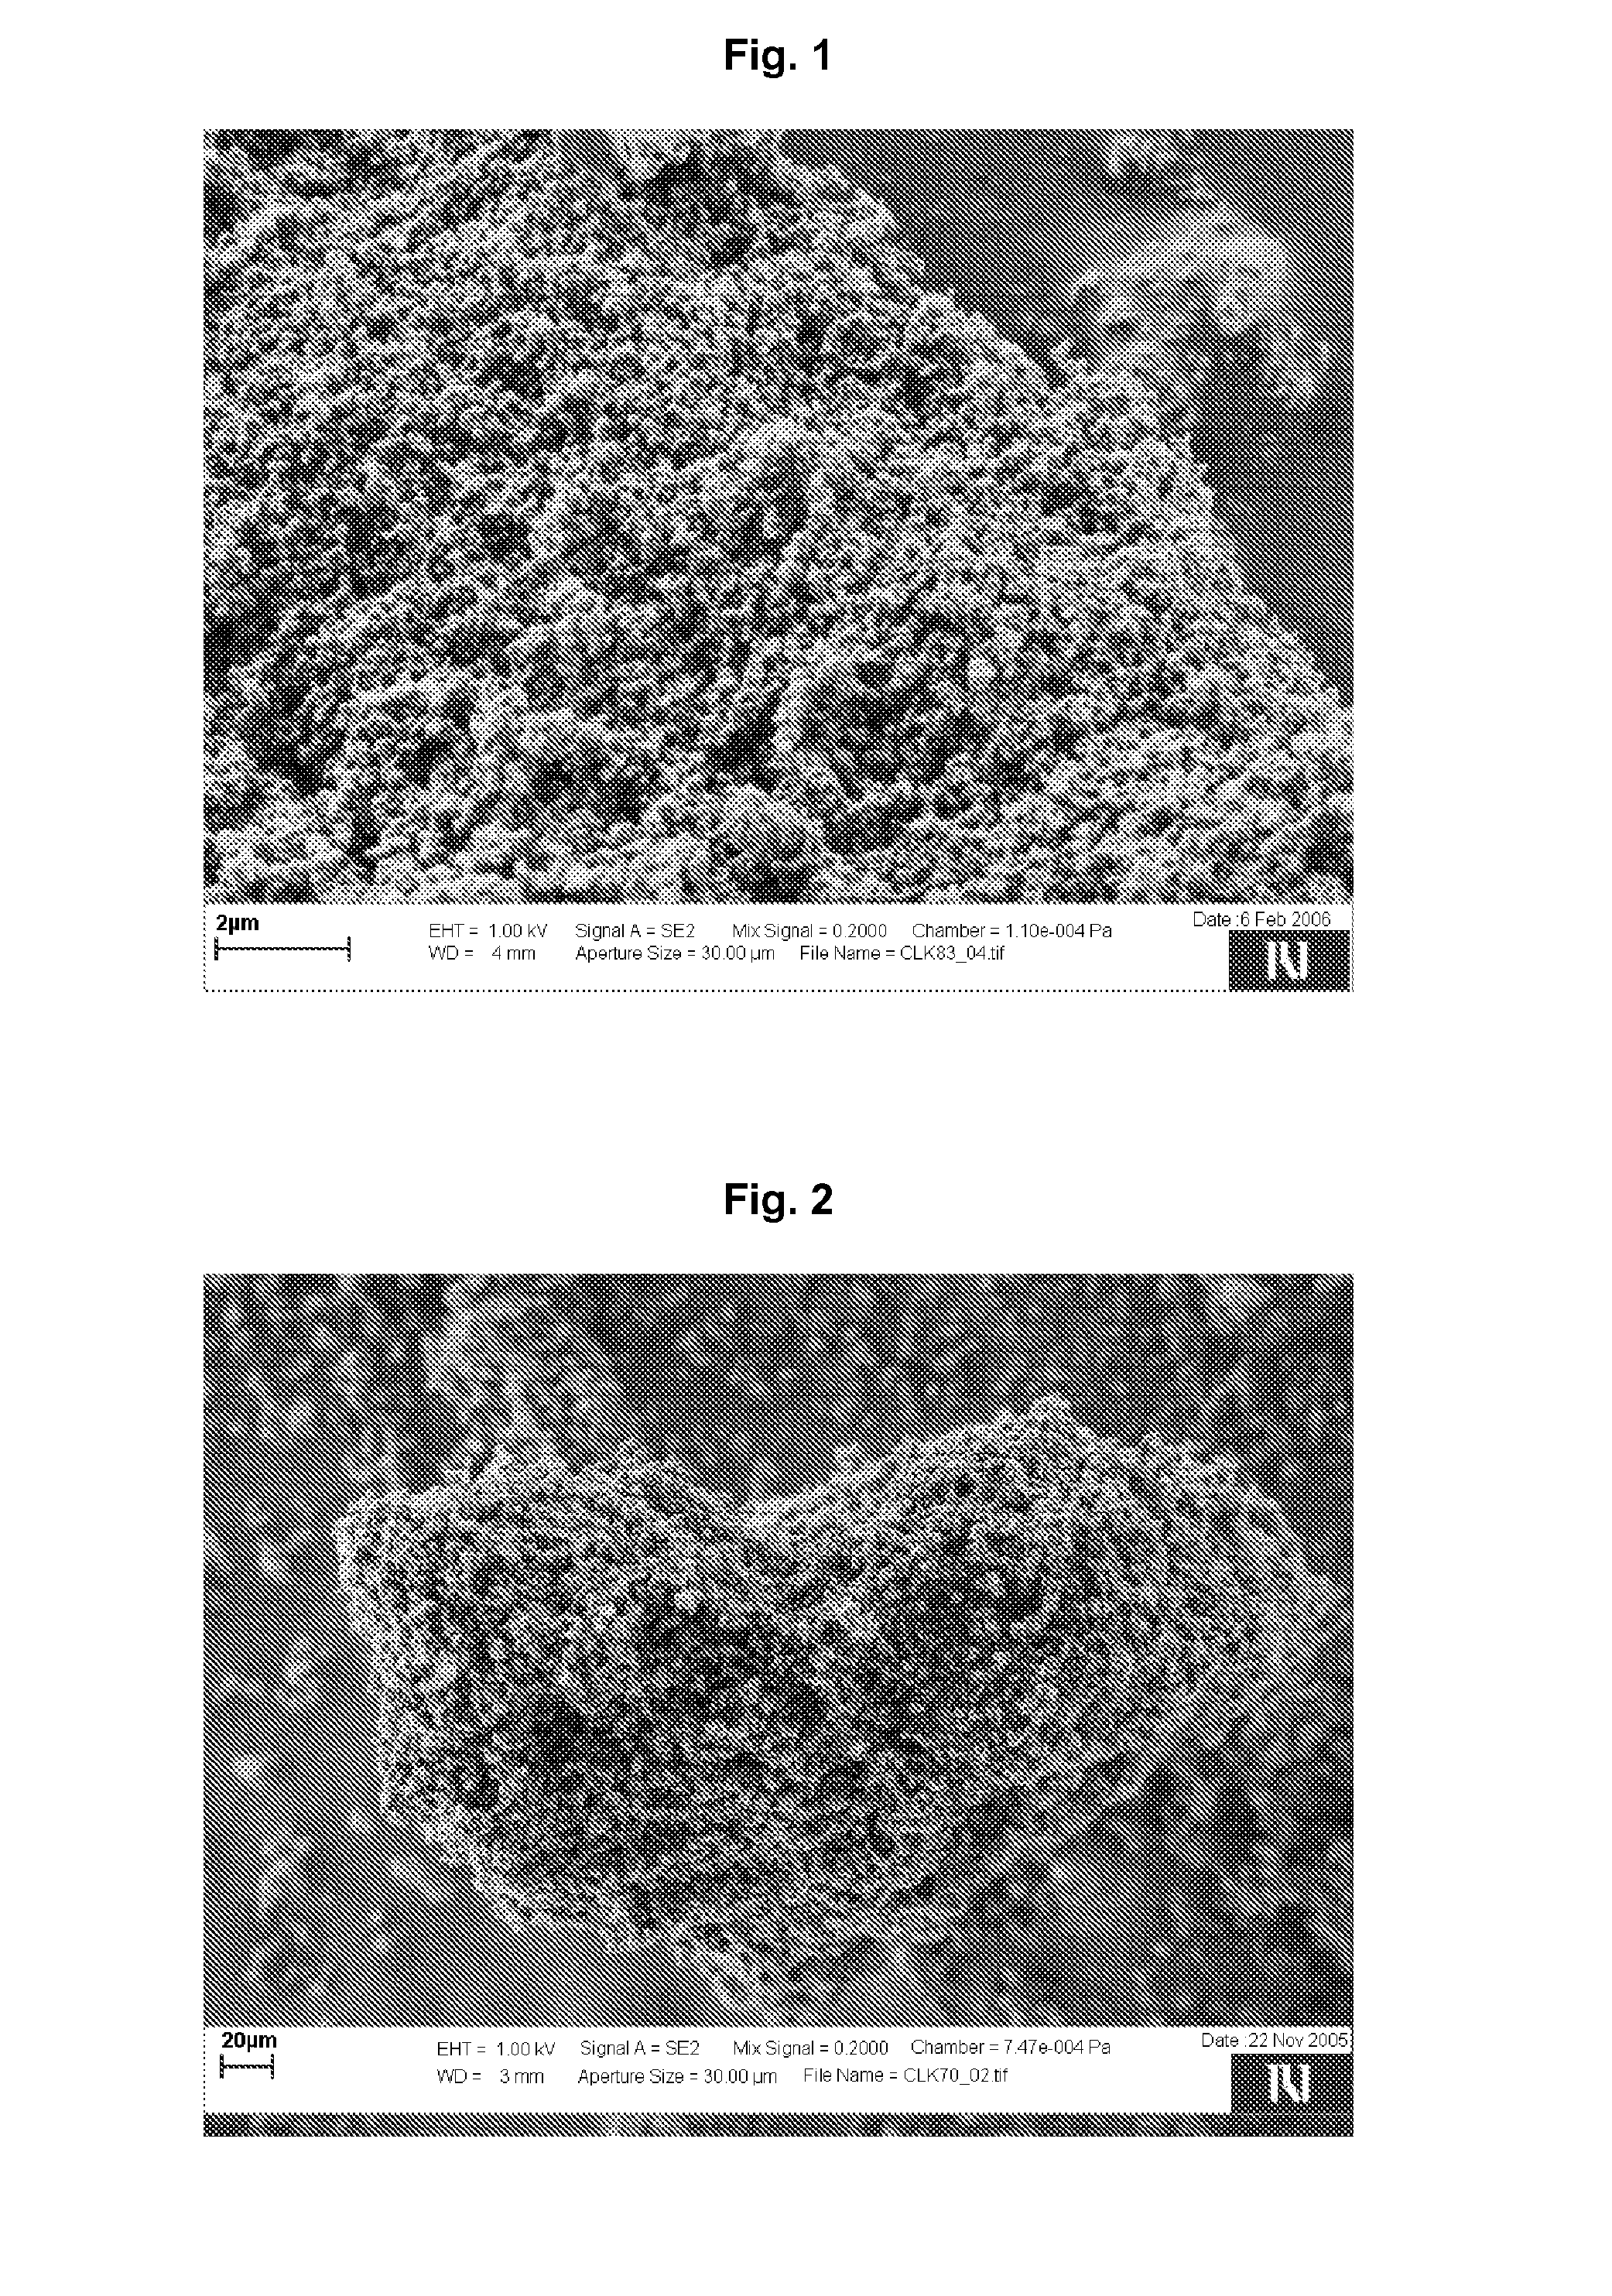 Coating of particles comprising a pharmaceutically active ingredient with a carbonate salt or phosphate salt